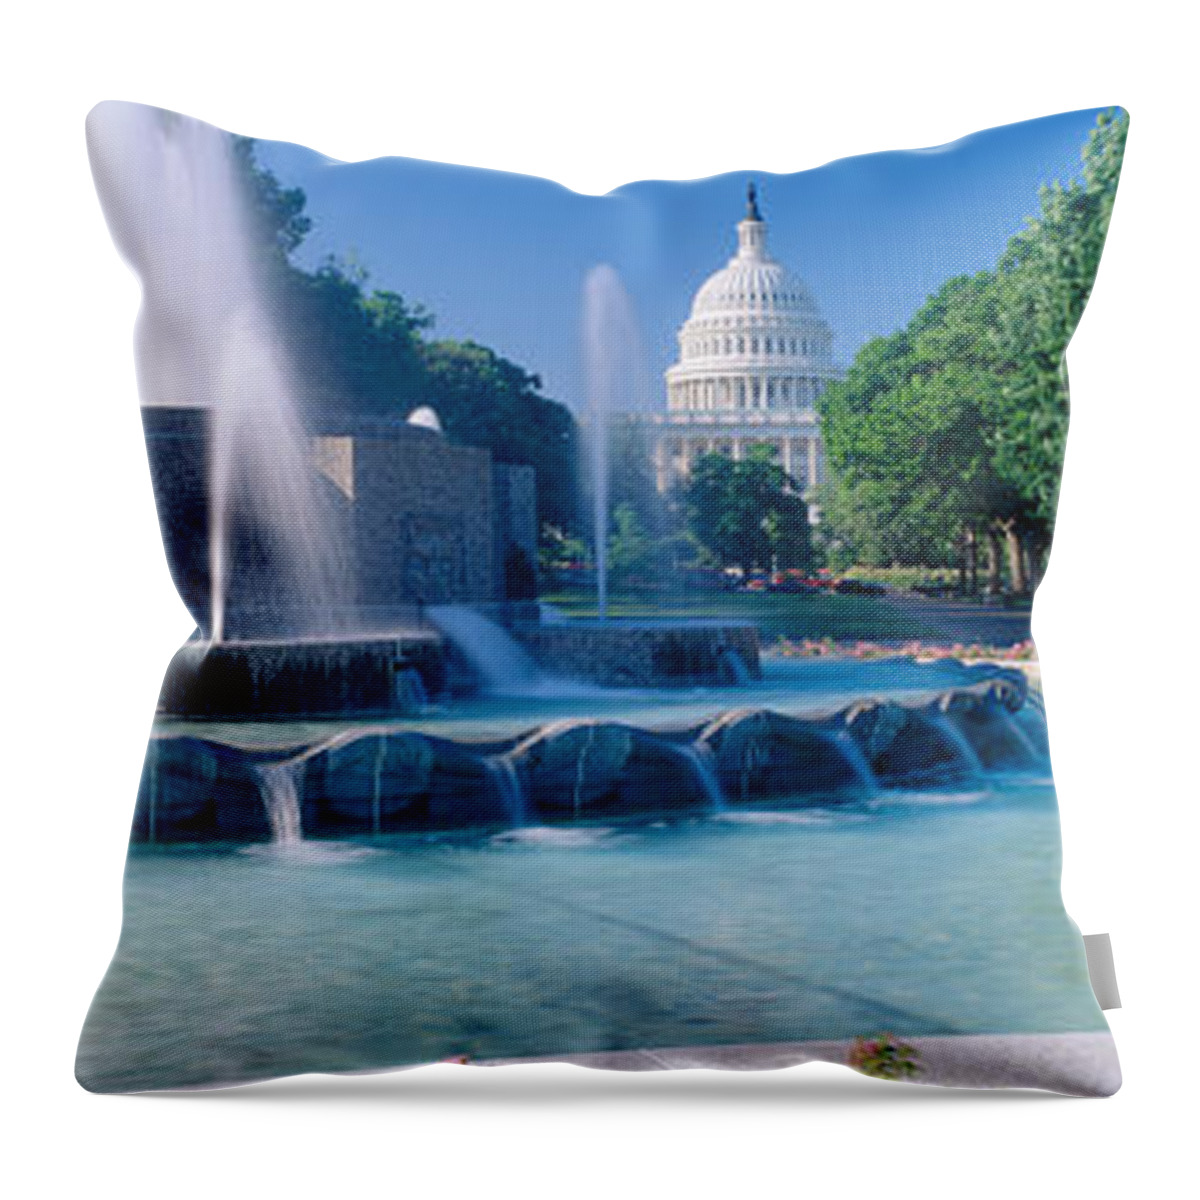 Photography Throw Pillow featuring the photograph Fountain And Us Capitol Building by Panoramic Images